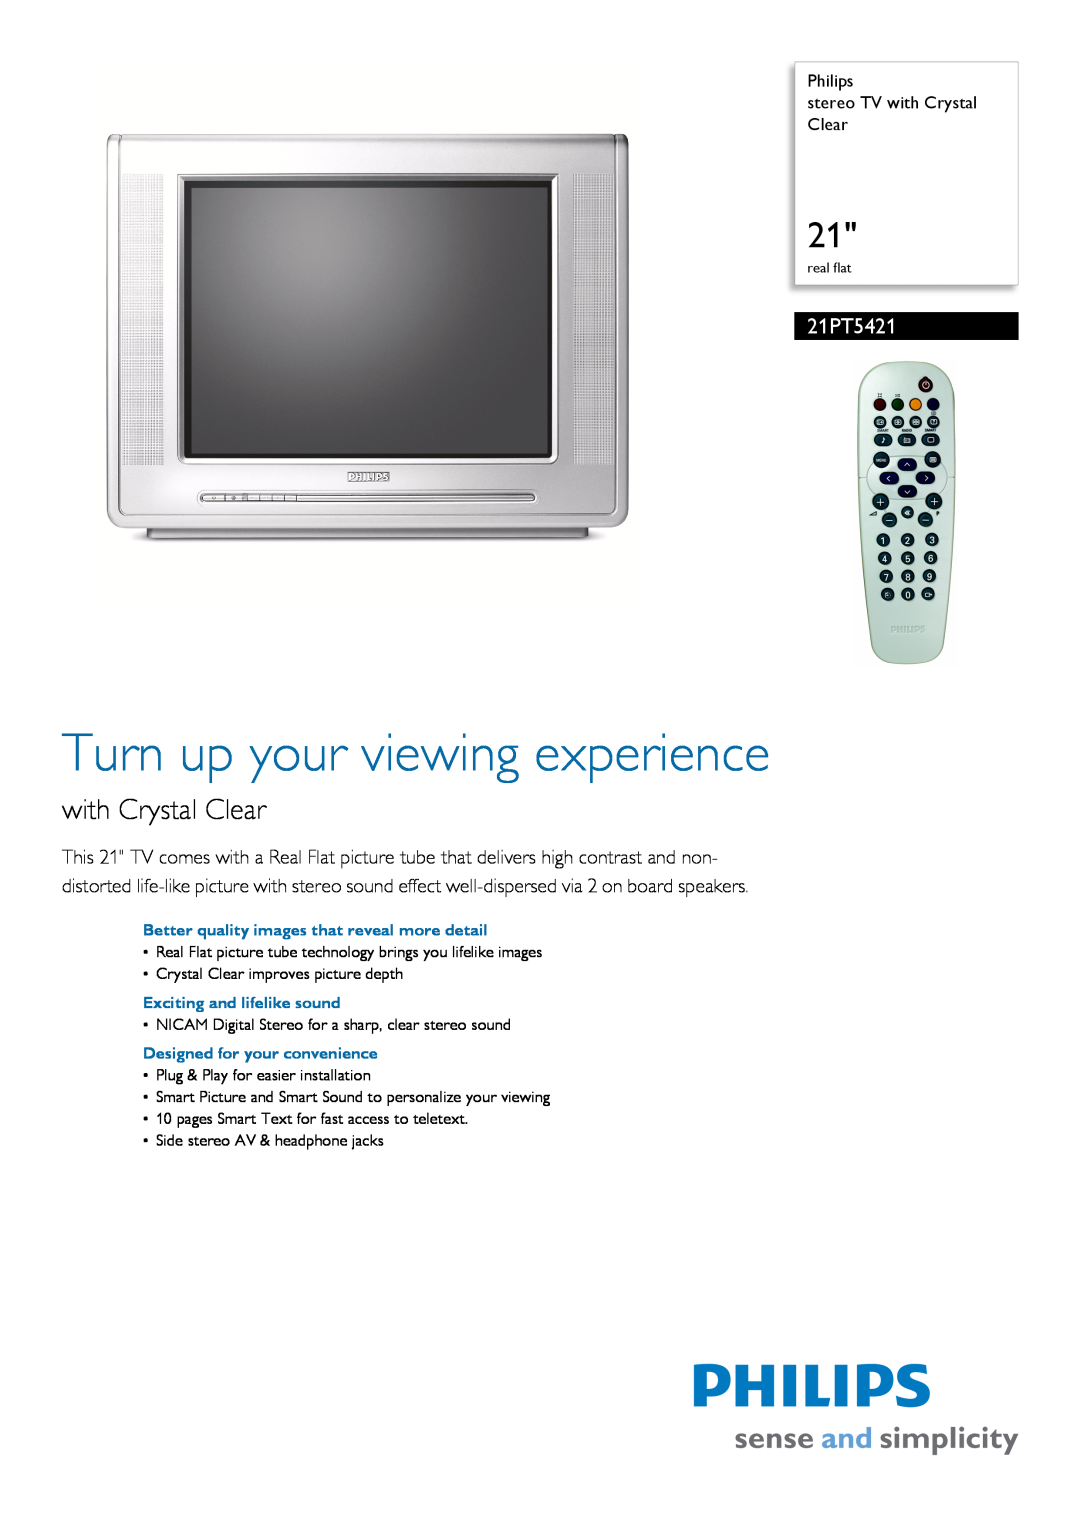 Philips 21PT5421/12 manual Turn up your viewing experience, with Crystal Clear 